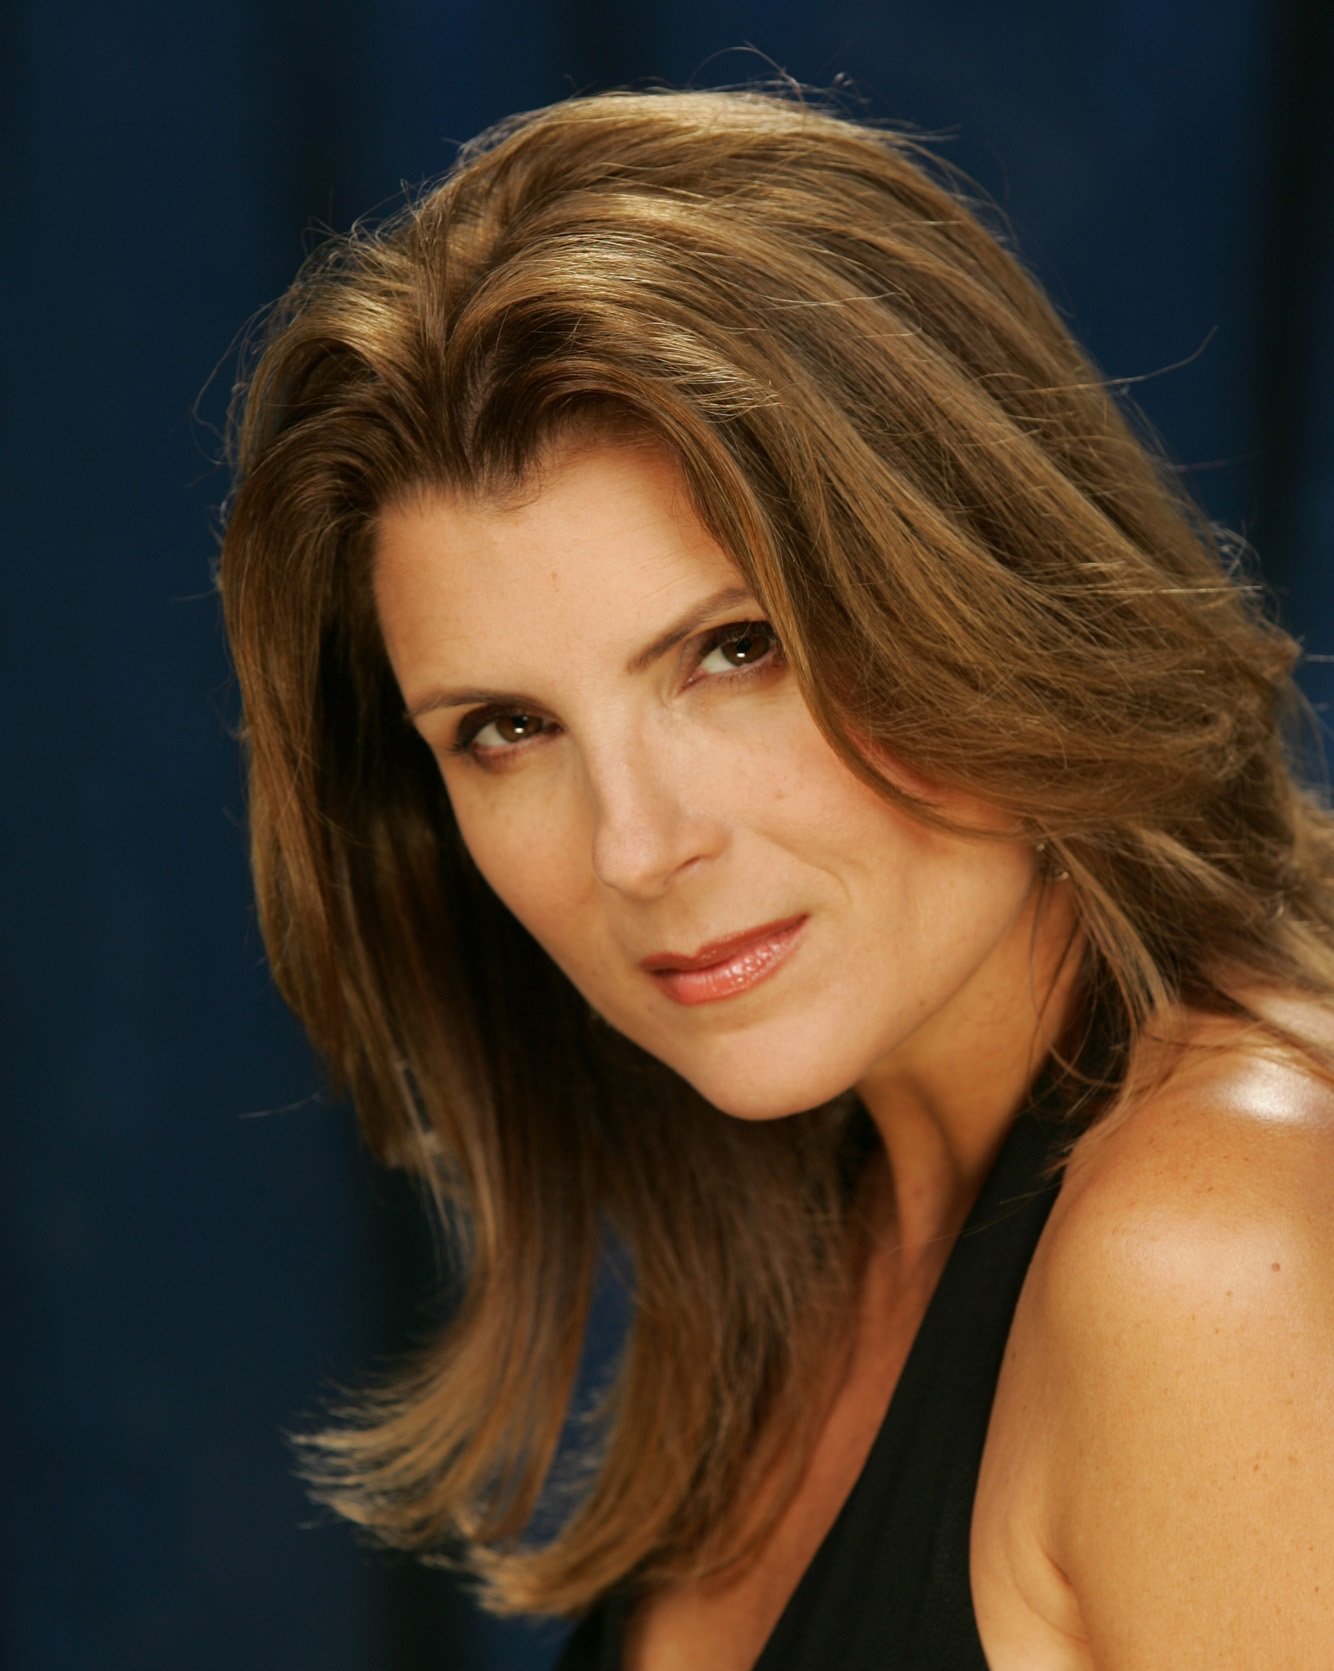 'The Bold and the Beautiful' star Kimberlin Brown wearing a black halter dress and posing in front of a blue backdrop.